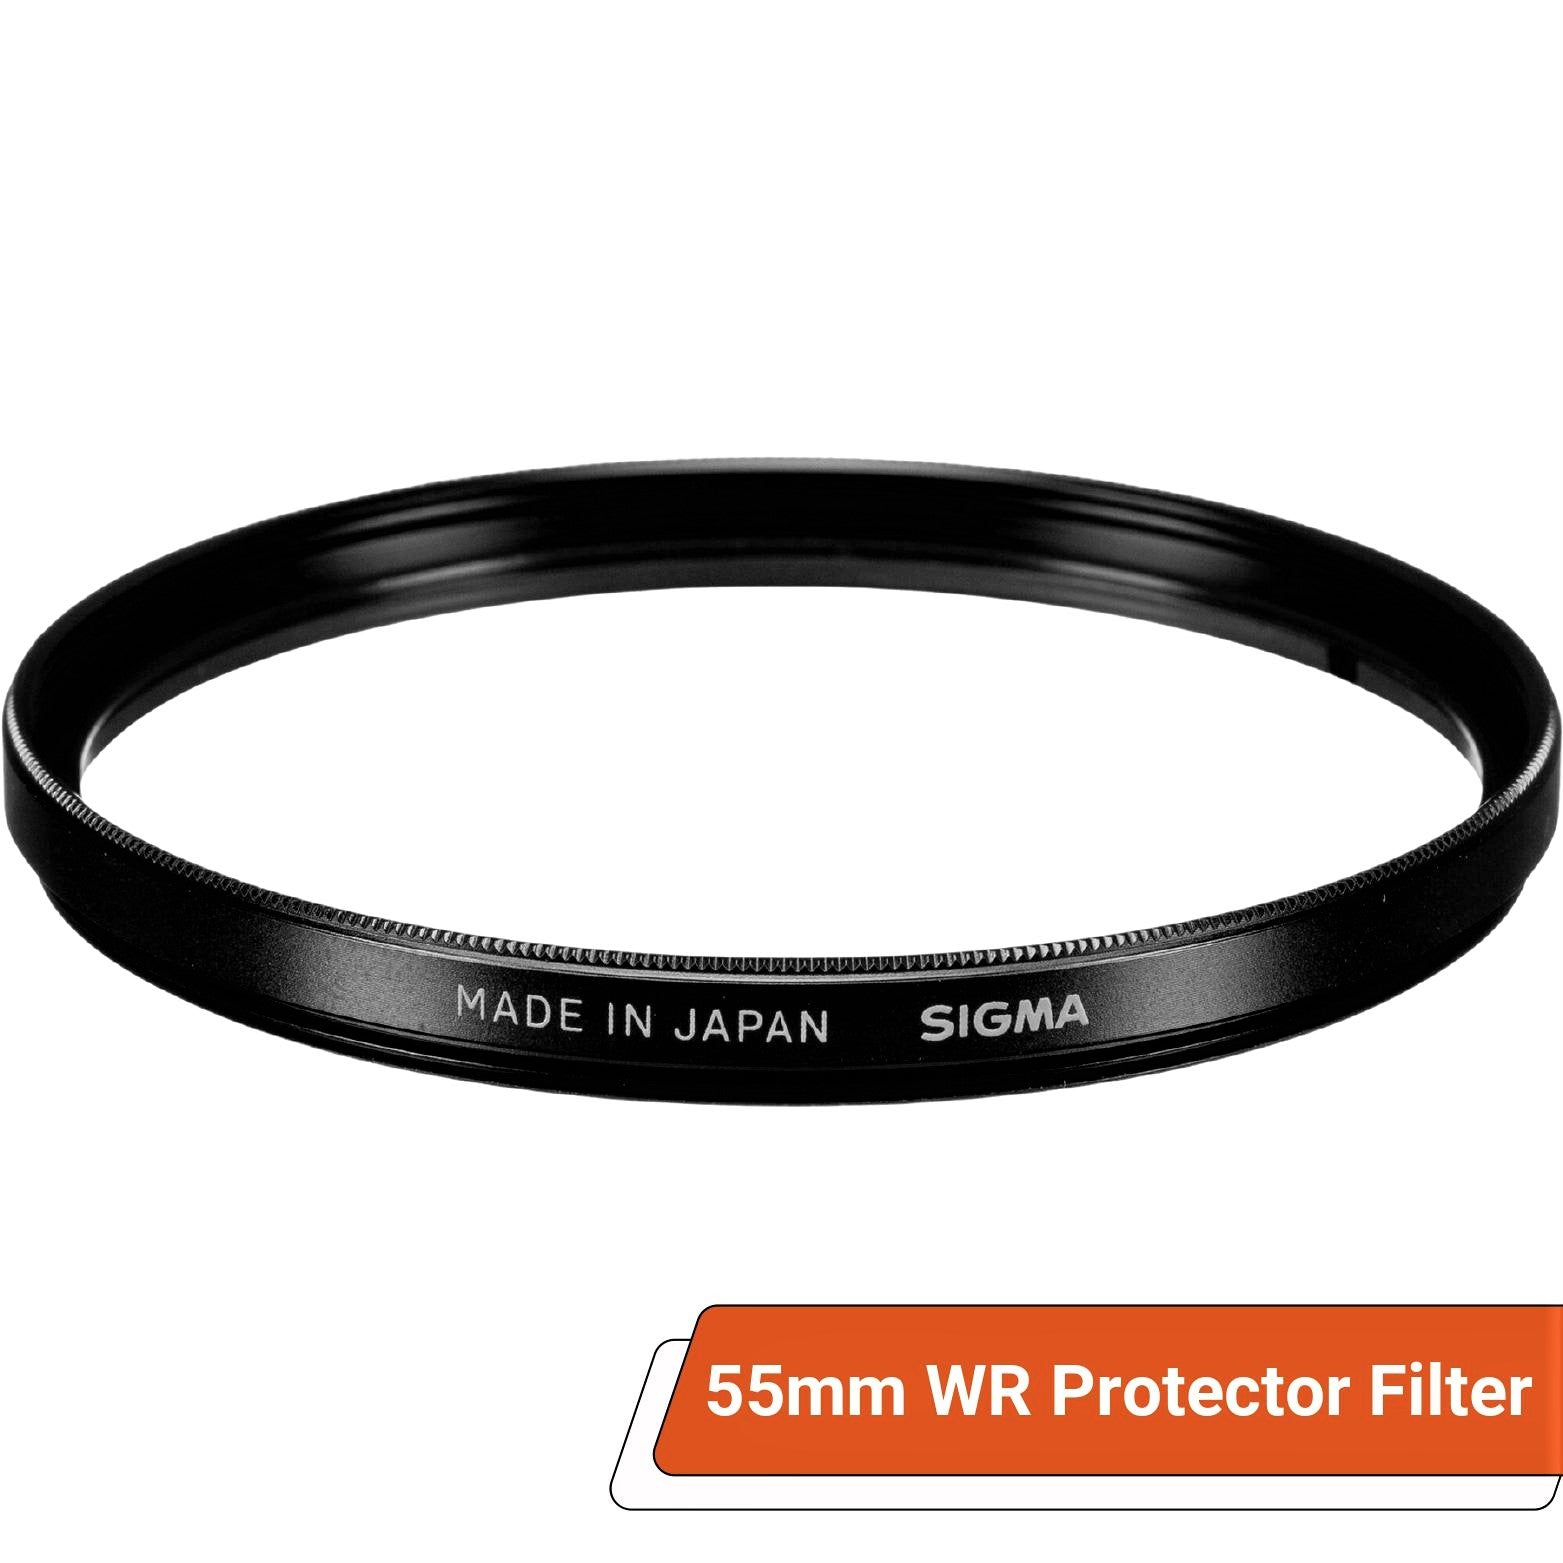 Sigma 55mm WR (Water Repellent) Protector Filter